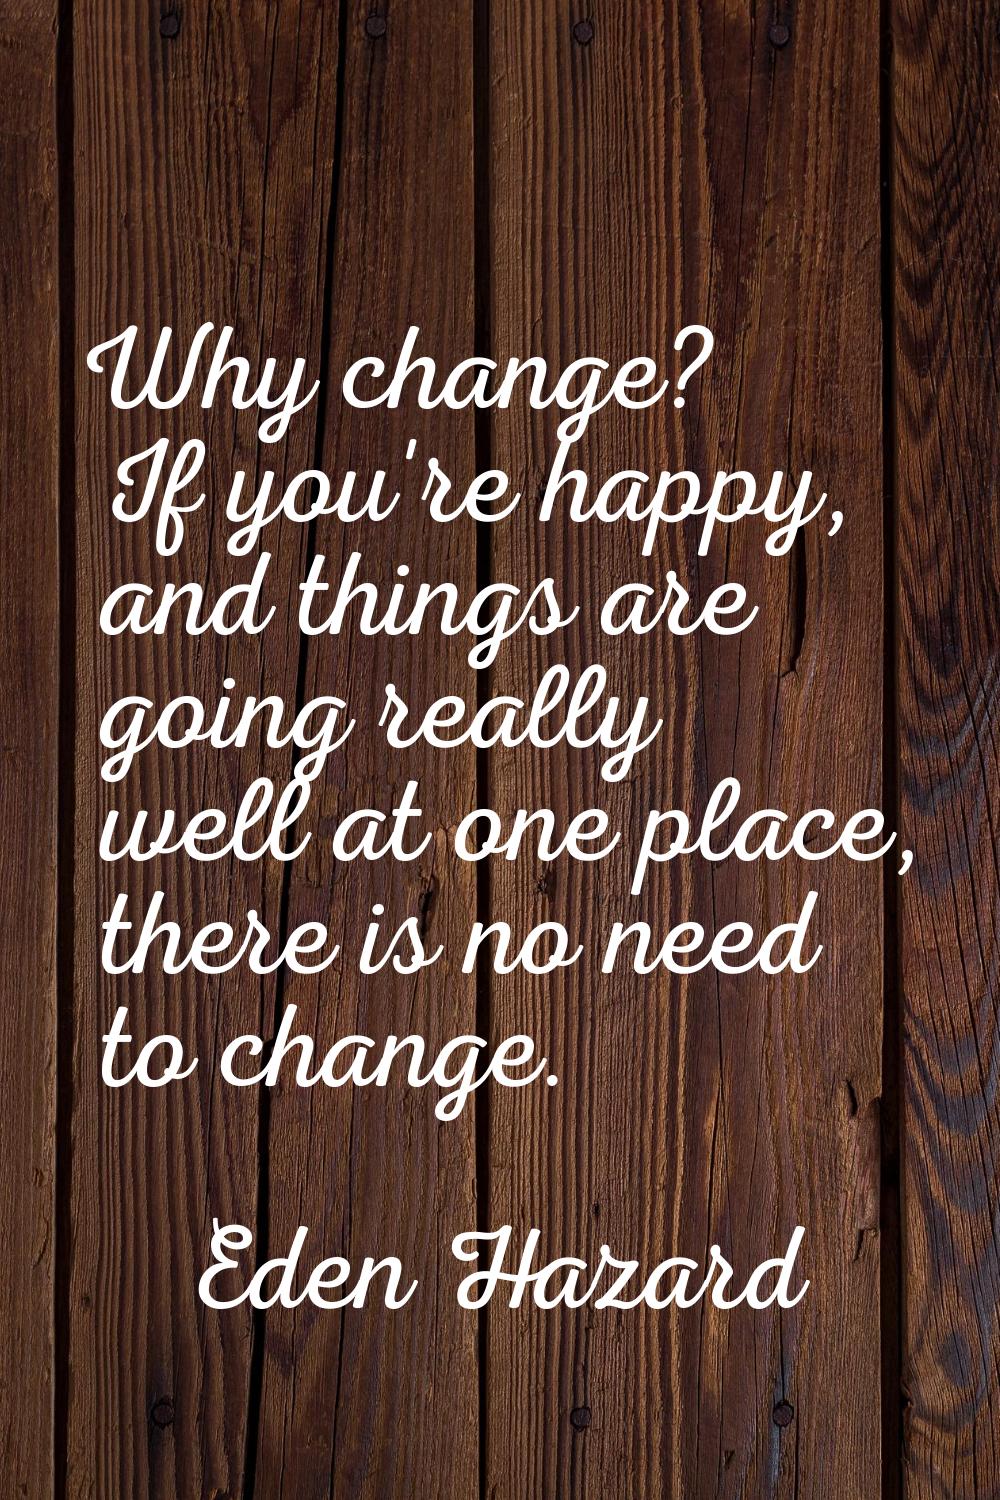 Why change? If you're happy, and things are going really well at one place, there is no need to cha